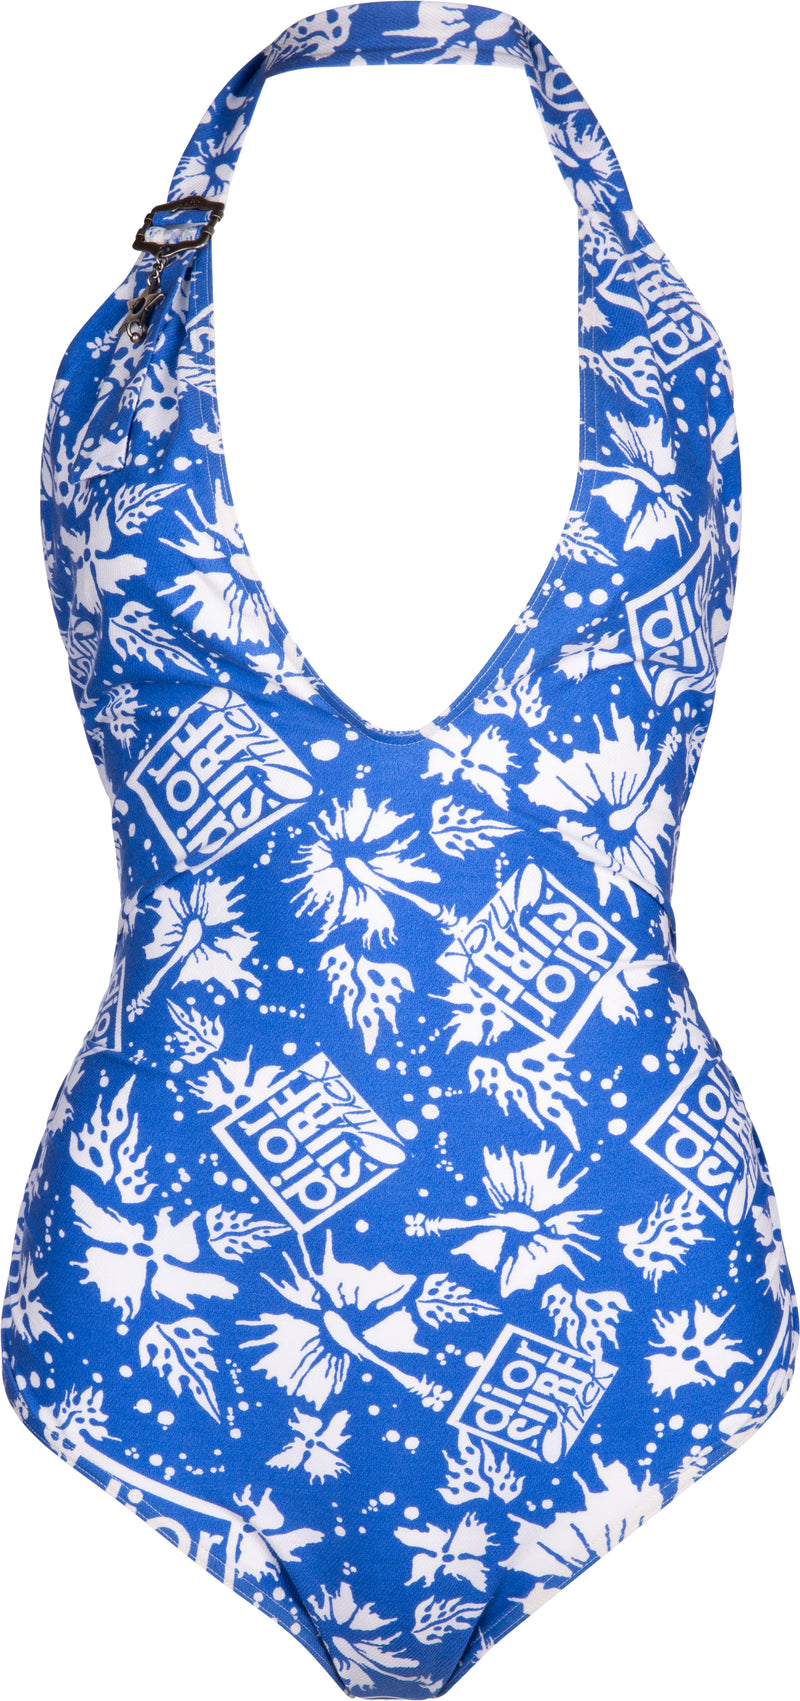 Christian Dior Surf Chick One-Piece